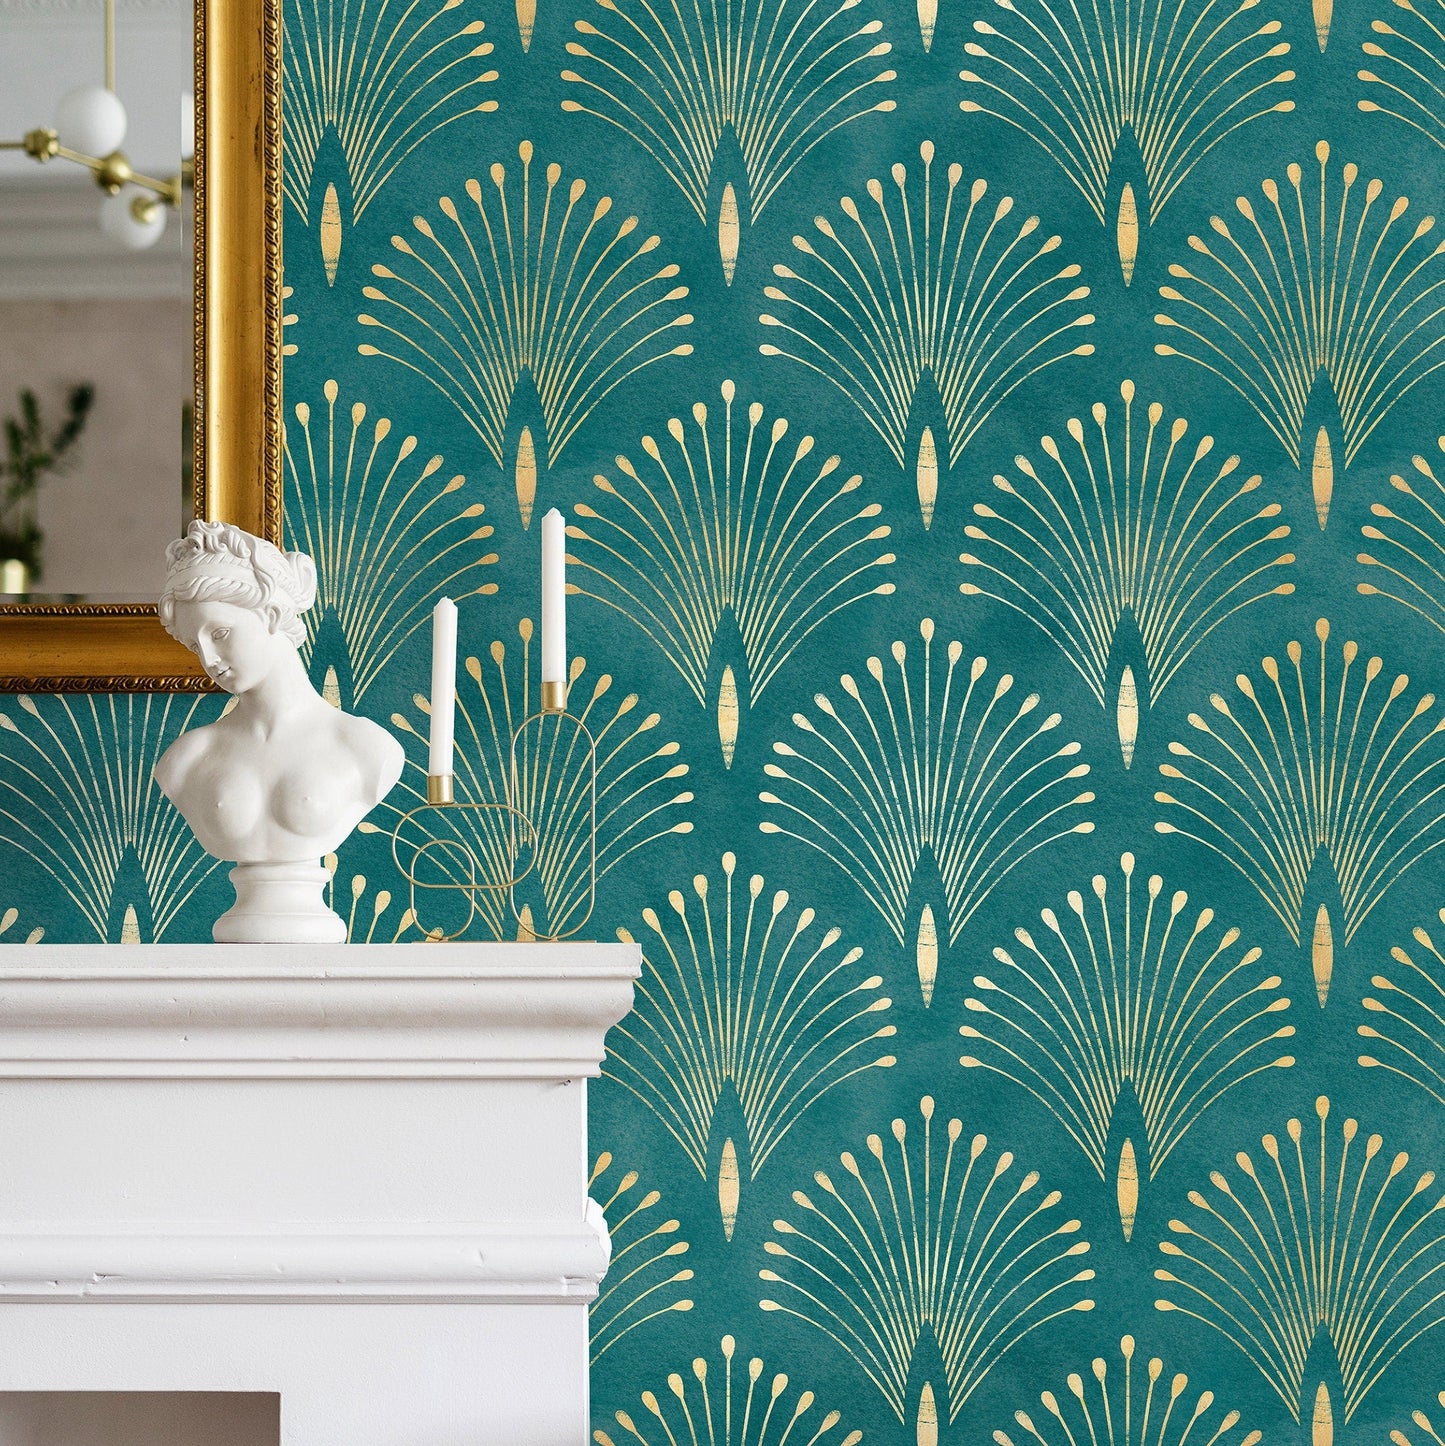 Gold and Teal Art Deco Palms Wallpaper Peel and Stick and Traditional Wallpaper Non-Metallic Wallpaper - C011